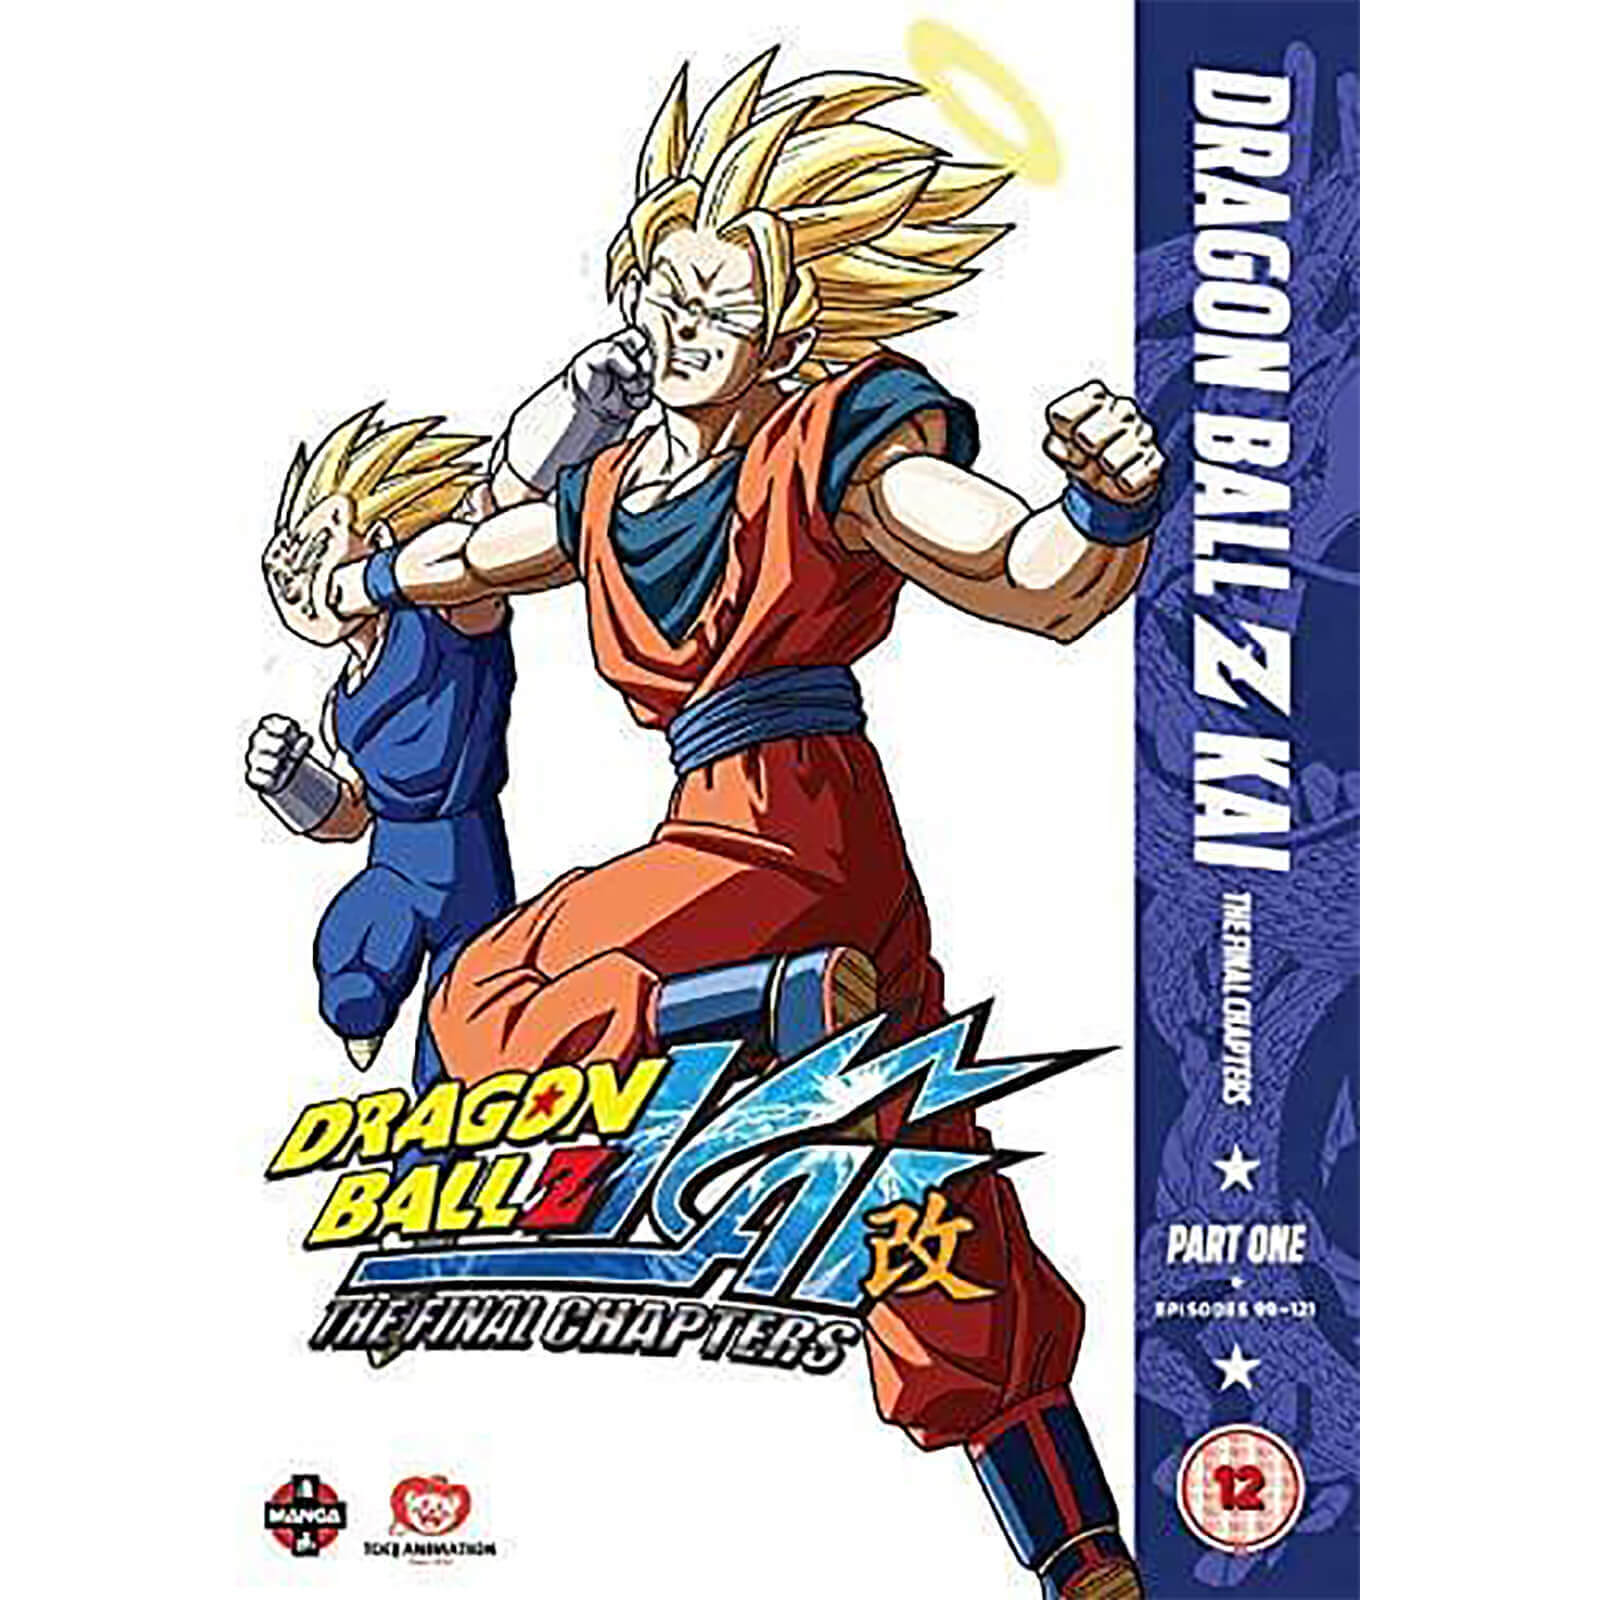 Dragon Ball Z KAI Final Chapters: Part 1 (Episodes 99-121) product